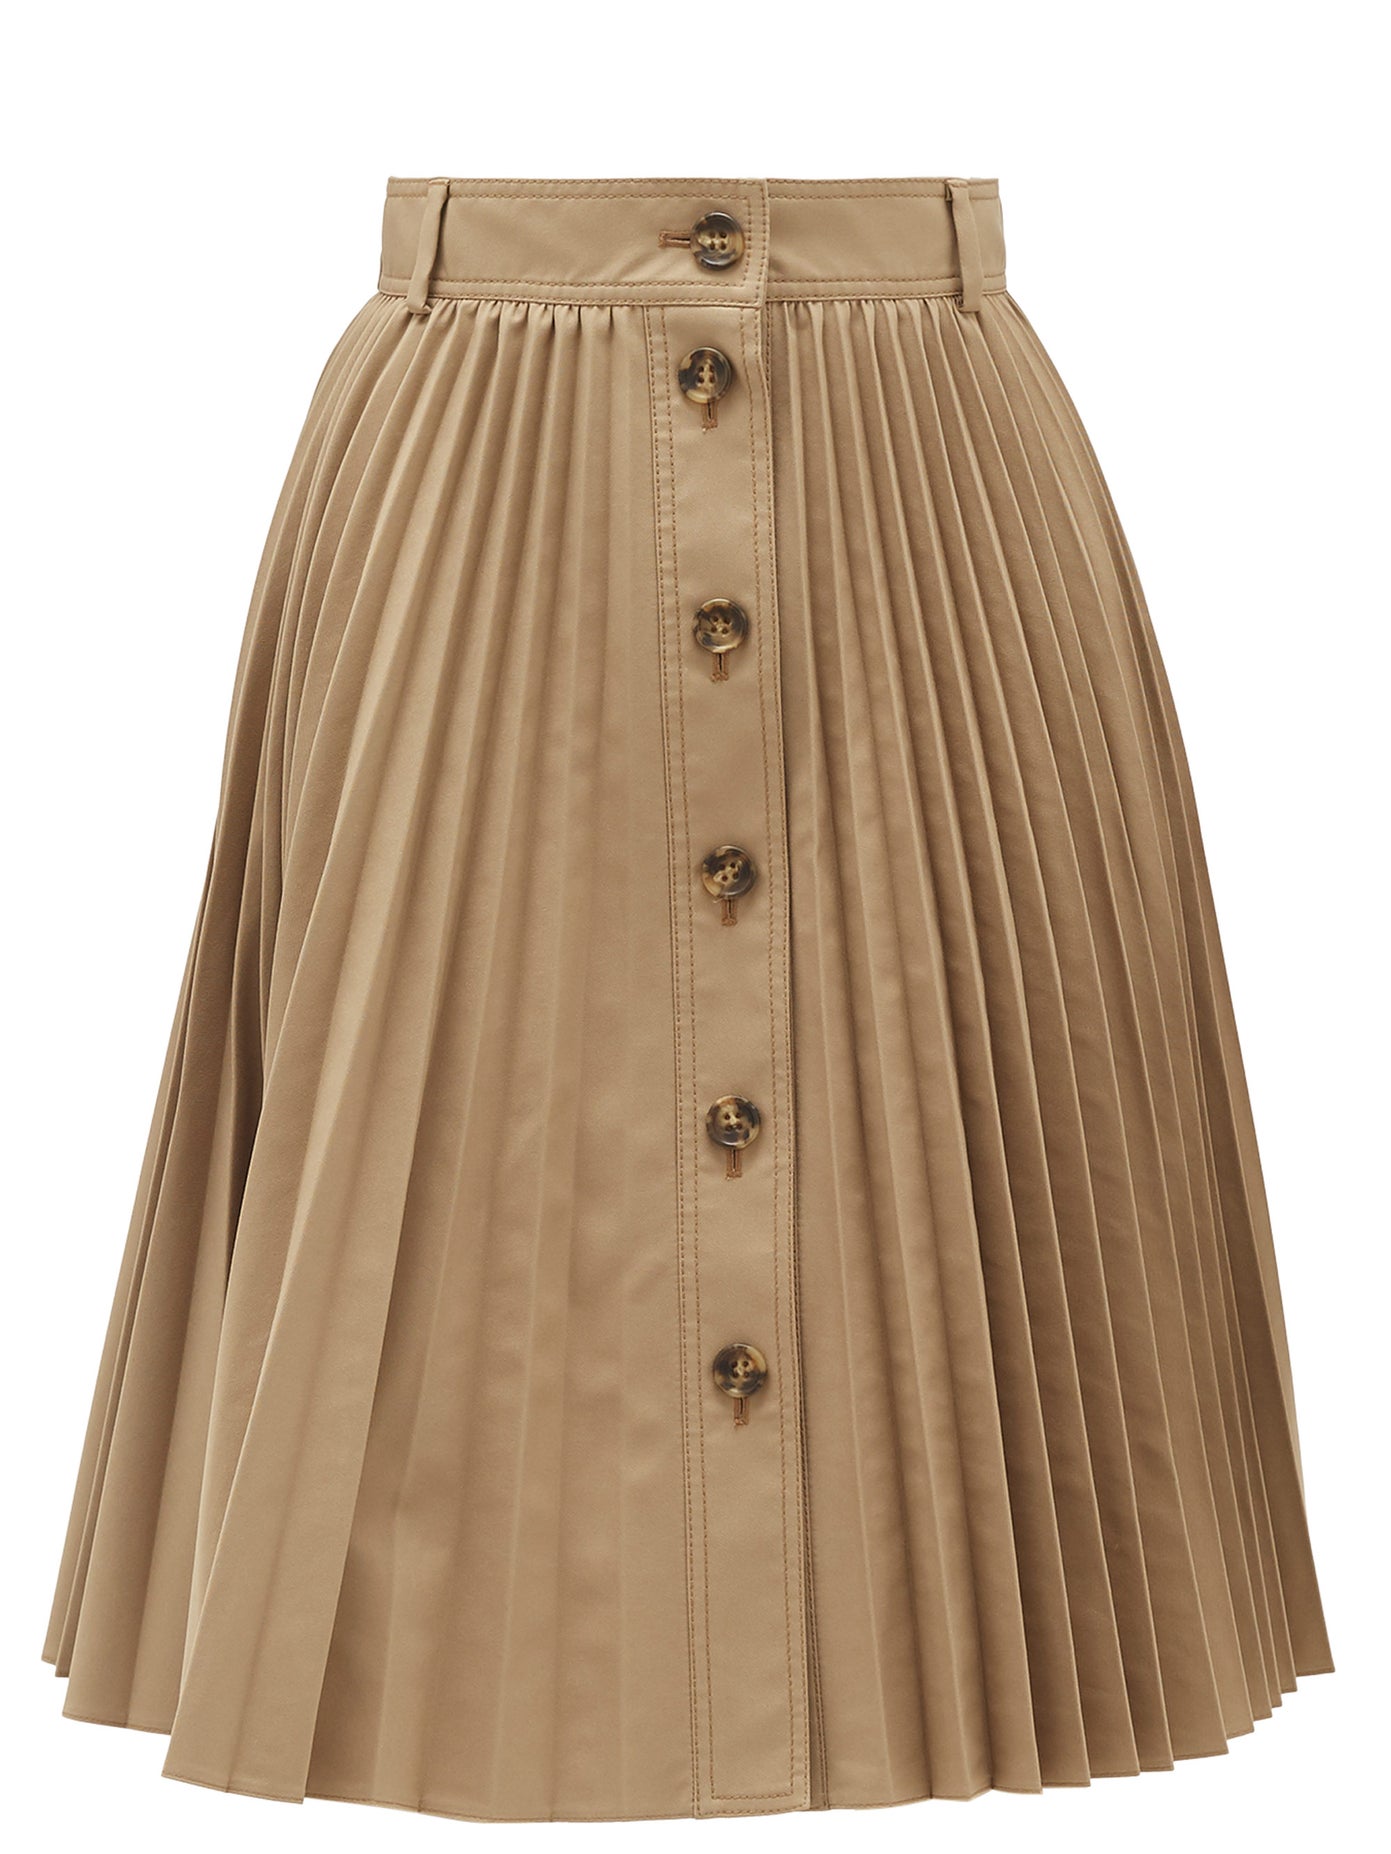 RED Valentino - Pleated Skirt | ABOUT